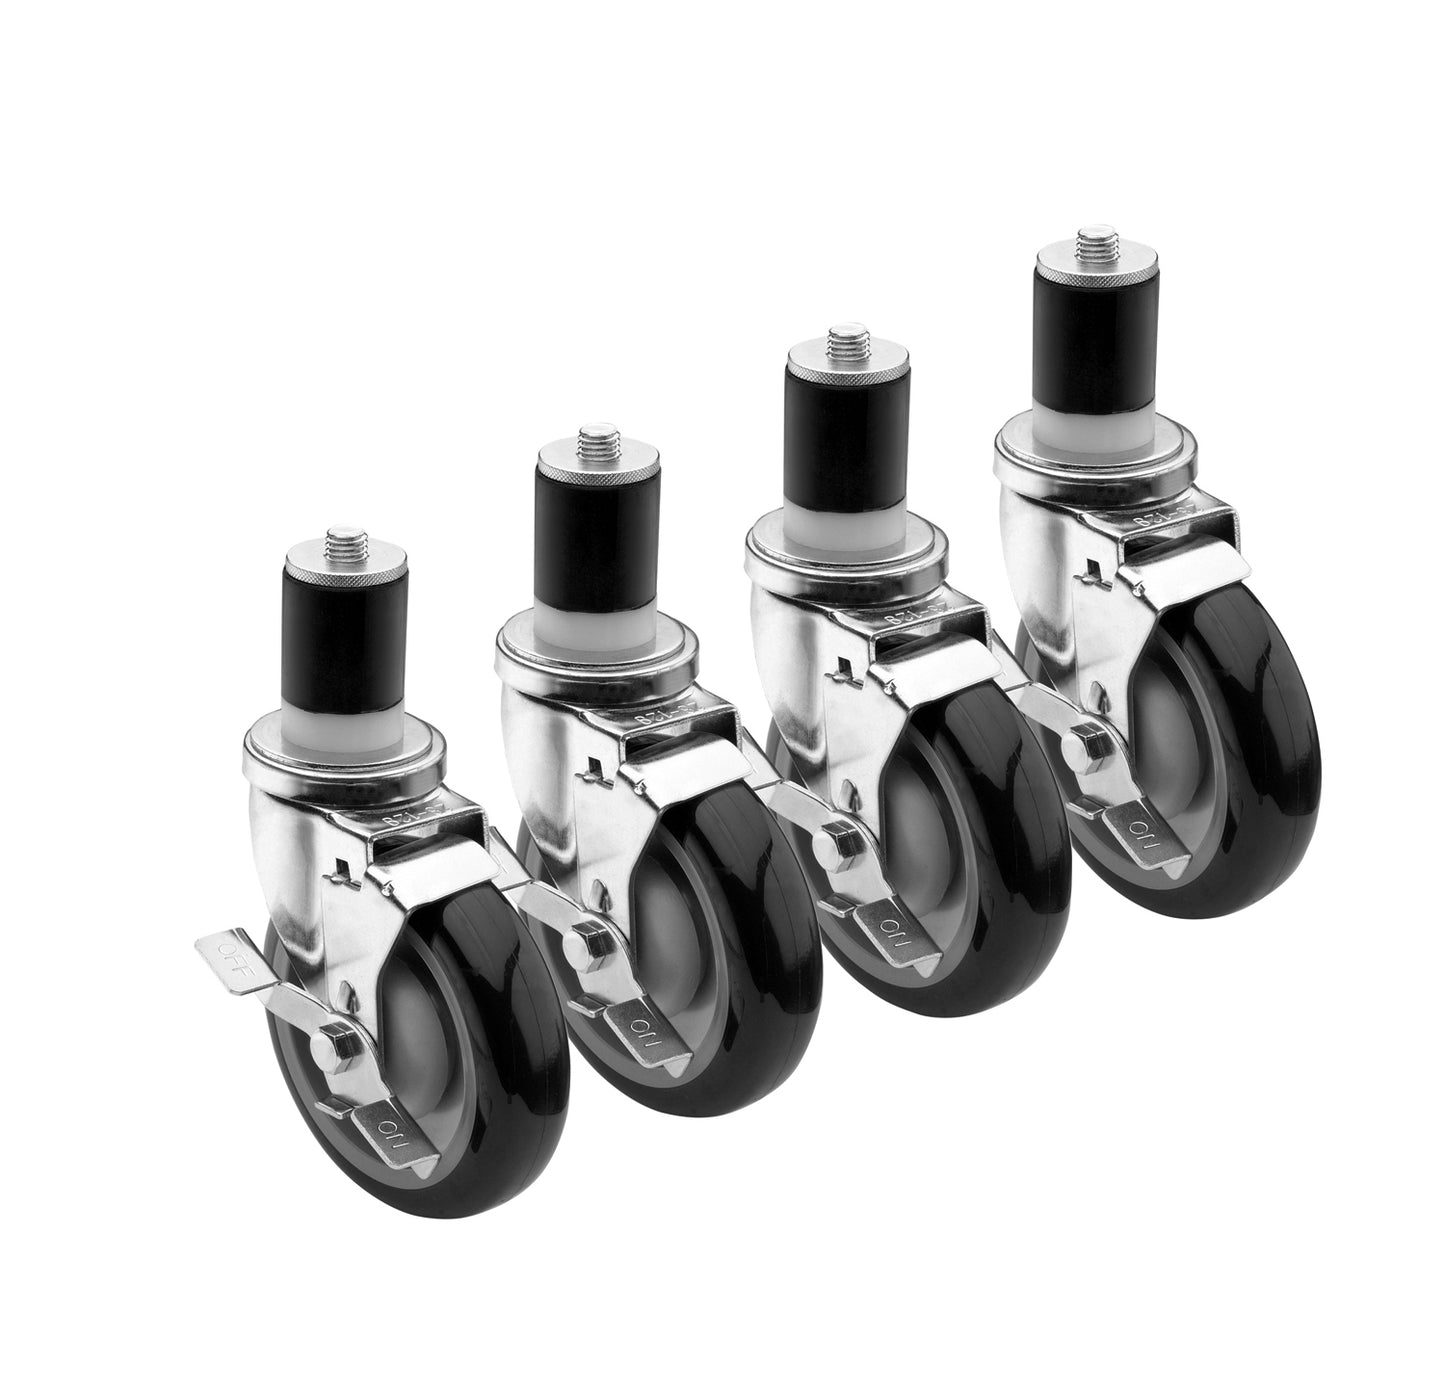 Krowne 28-125S SET OF 1 5/8" WORKTABLE CASTERS WITH 3" LOCKING WHEELS - 4 PIECES PER SET    